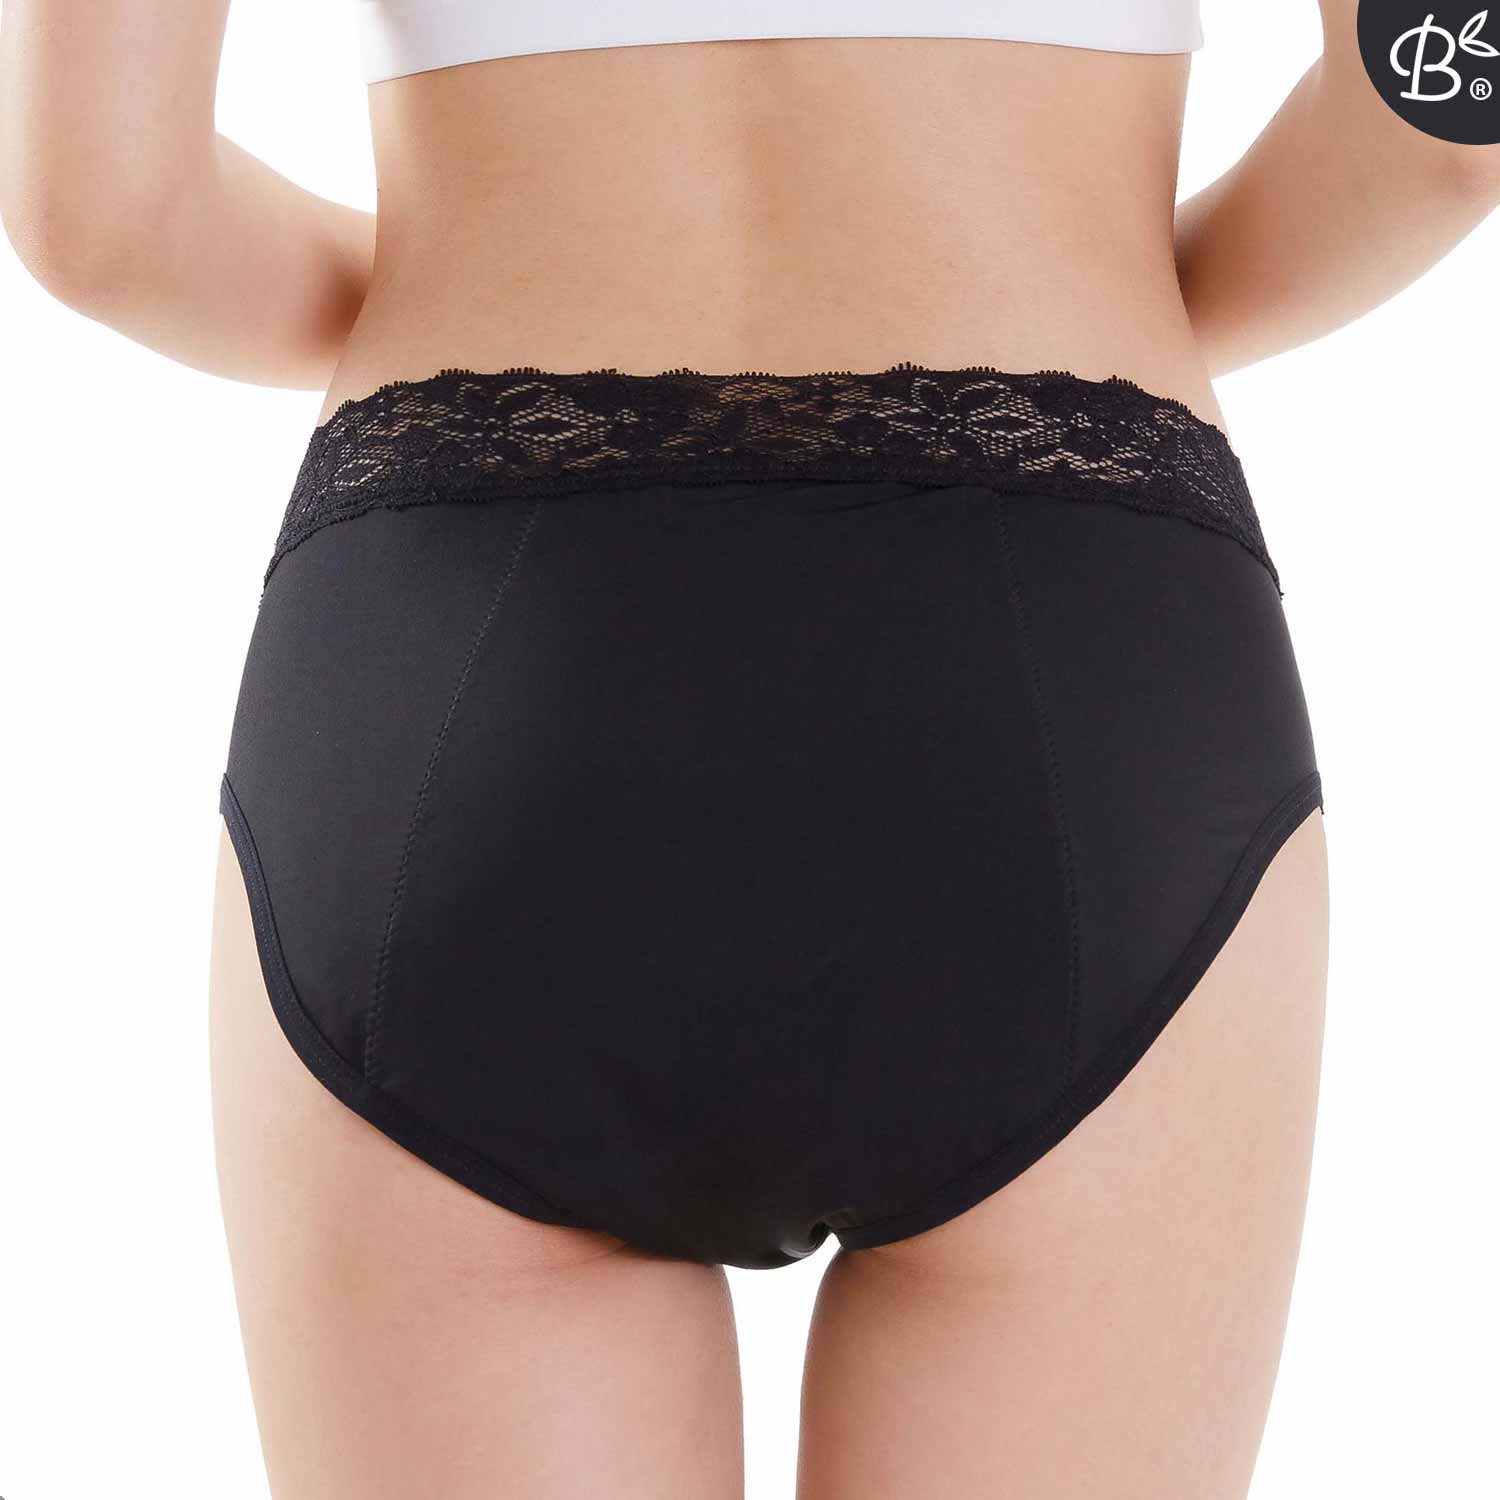 Cage Panties. Bamboo blend. Adjustable size tabs. Mid Rise. Black